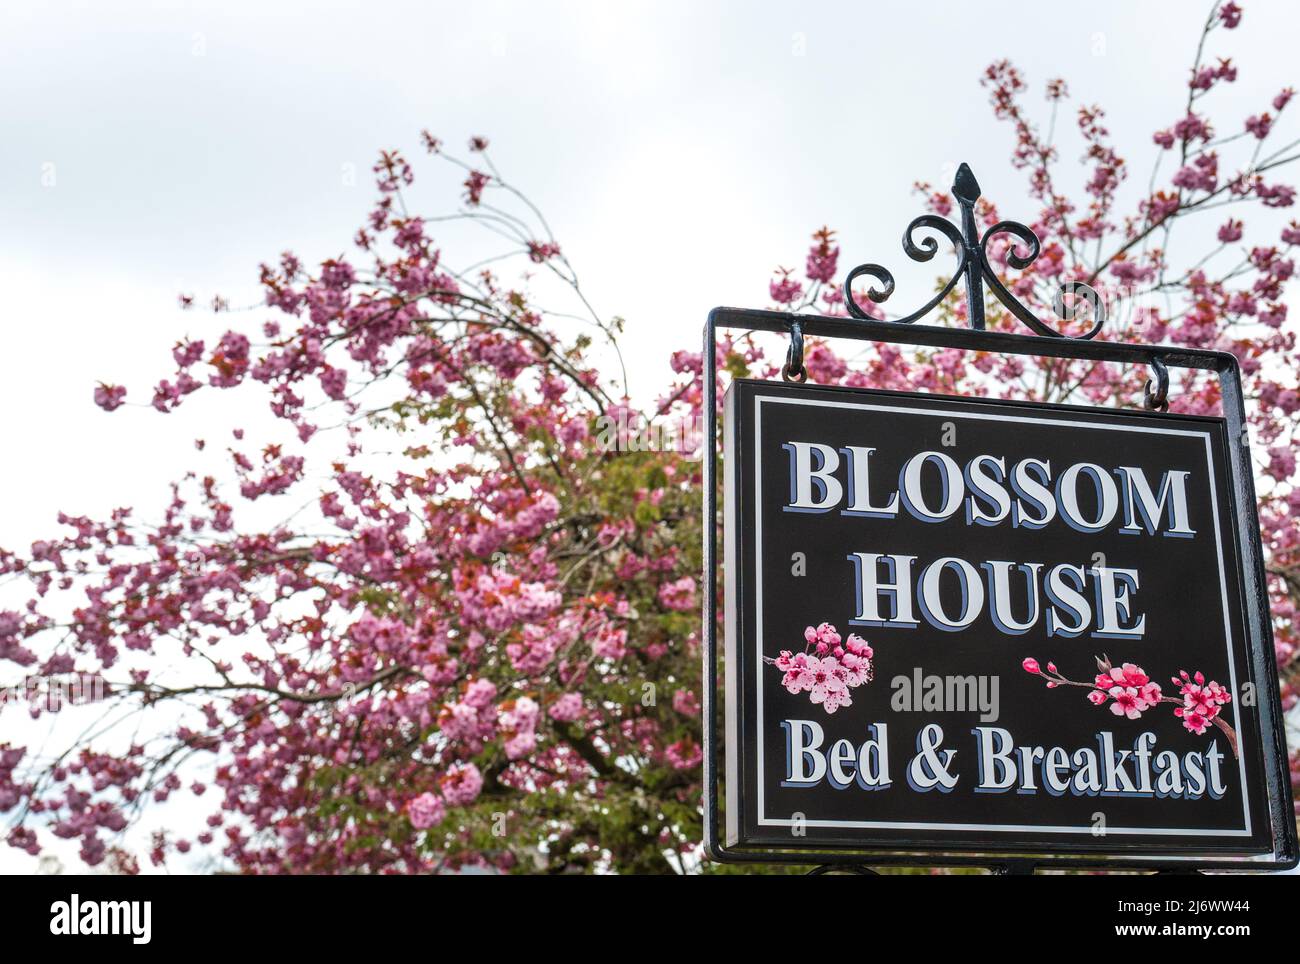 Blossom house a bed and breakfast accommodation in the Derbyshire peak district village of Tideswell and a Cherry tree full of pink blossom. Stock Photo